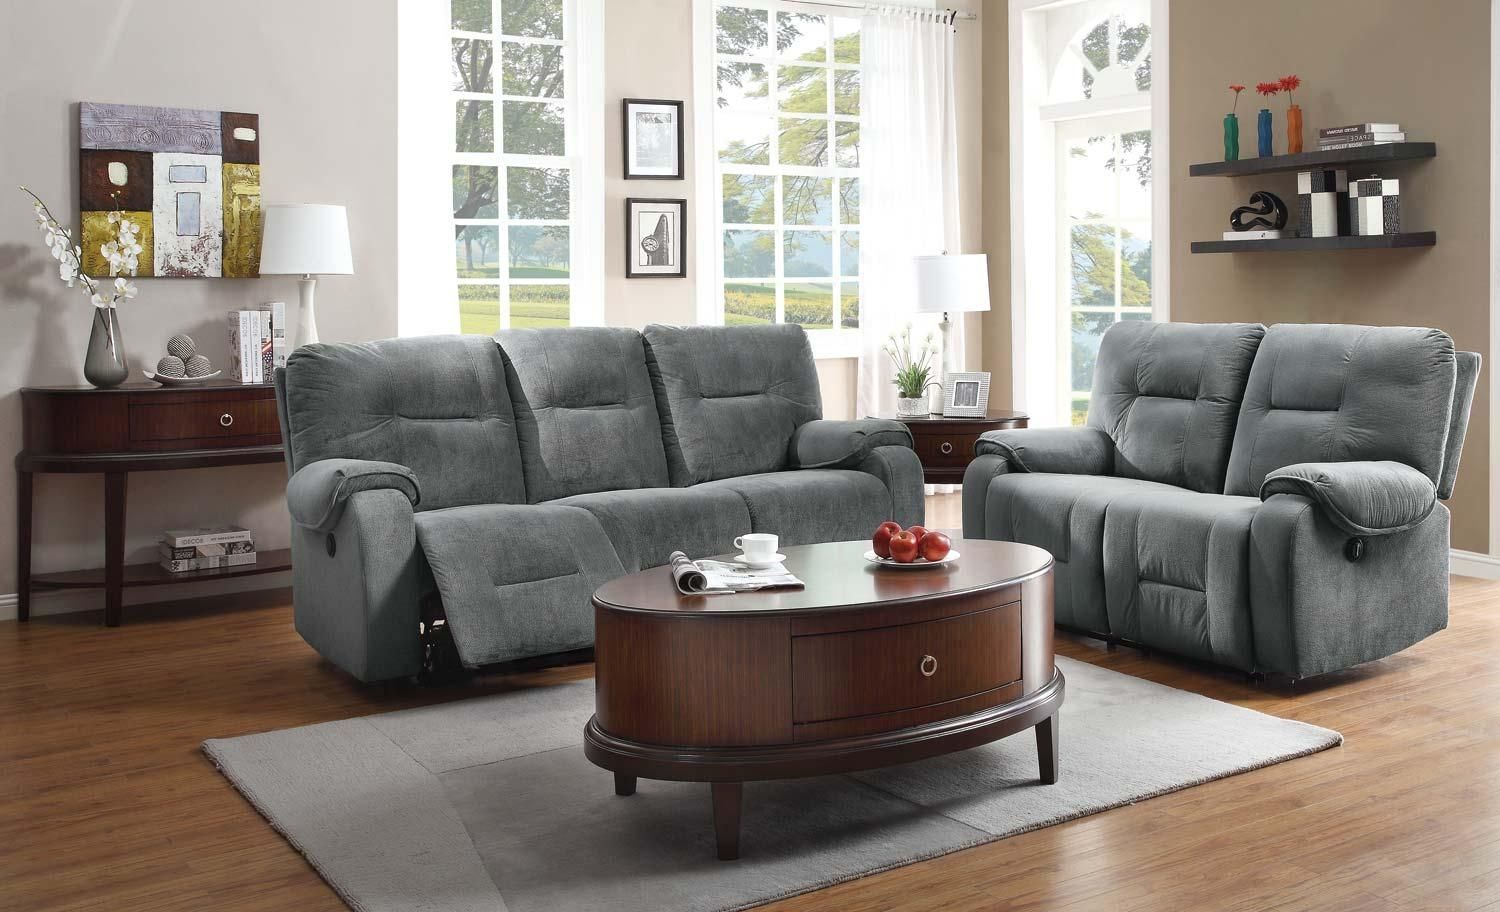 20+ Choices Of Blue Gray Sofas | Sofa Ideas With Regard To Sofas In Bluish Grey (View 13 of 20)